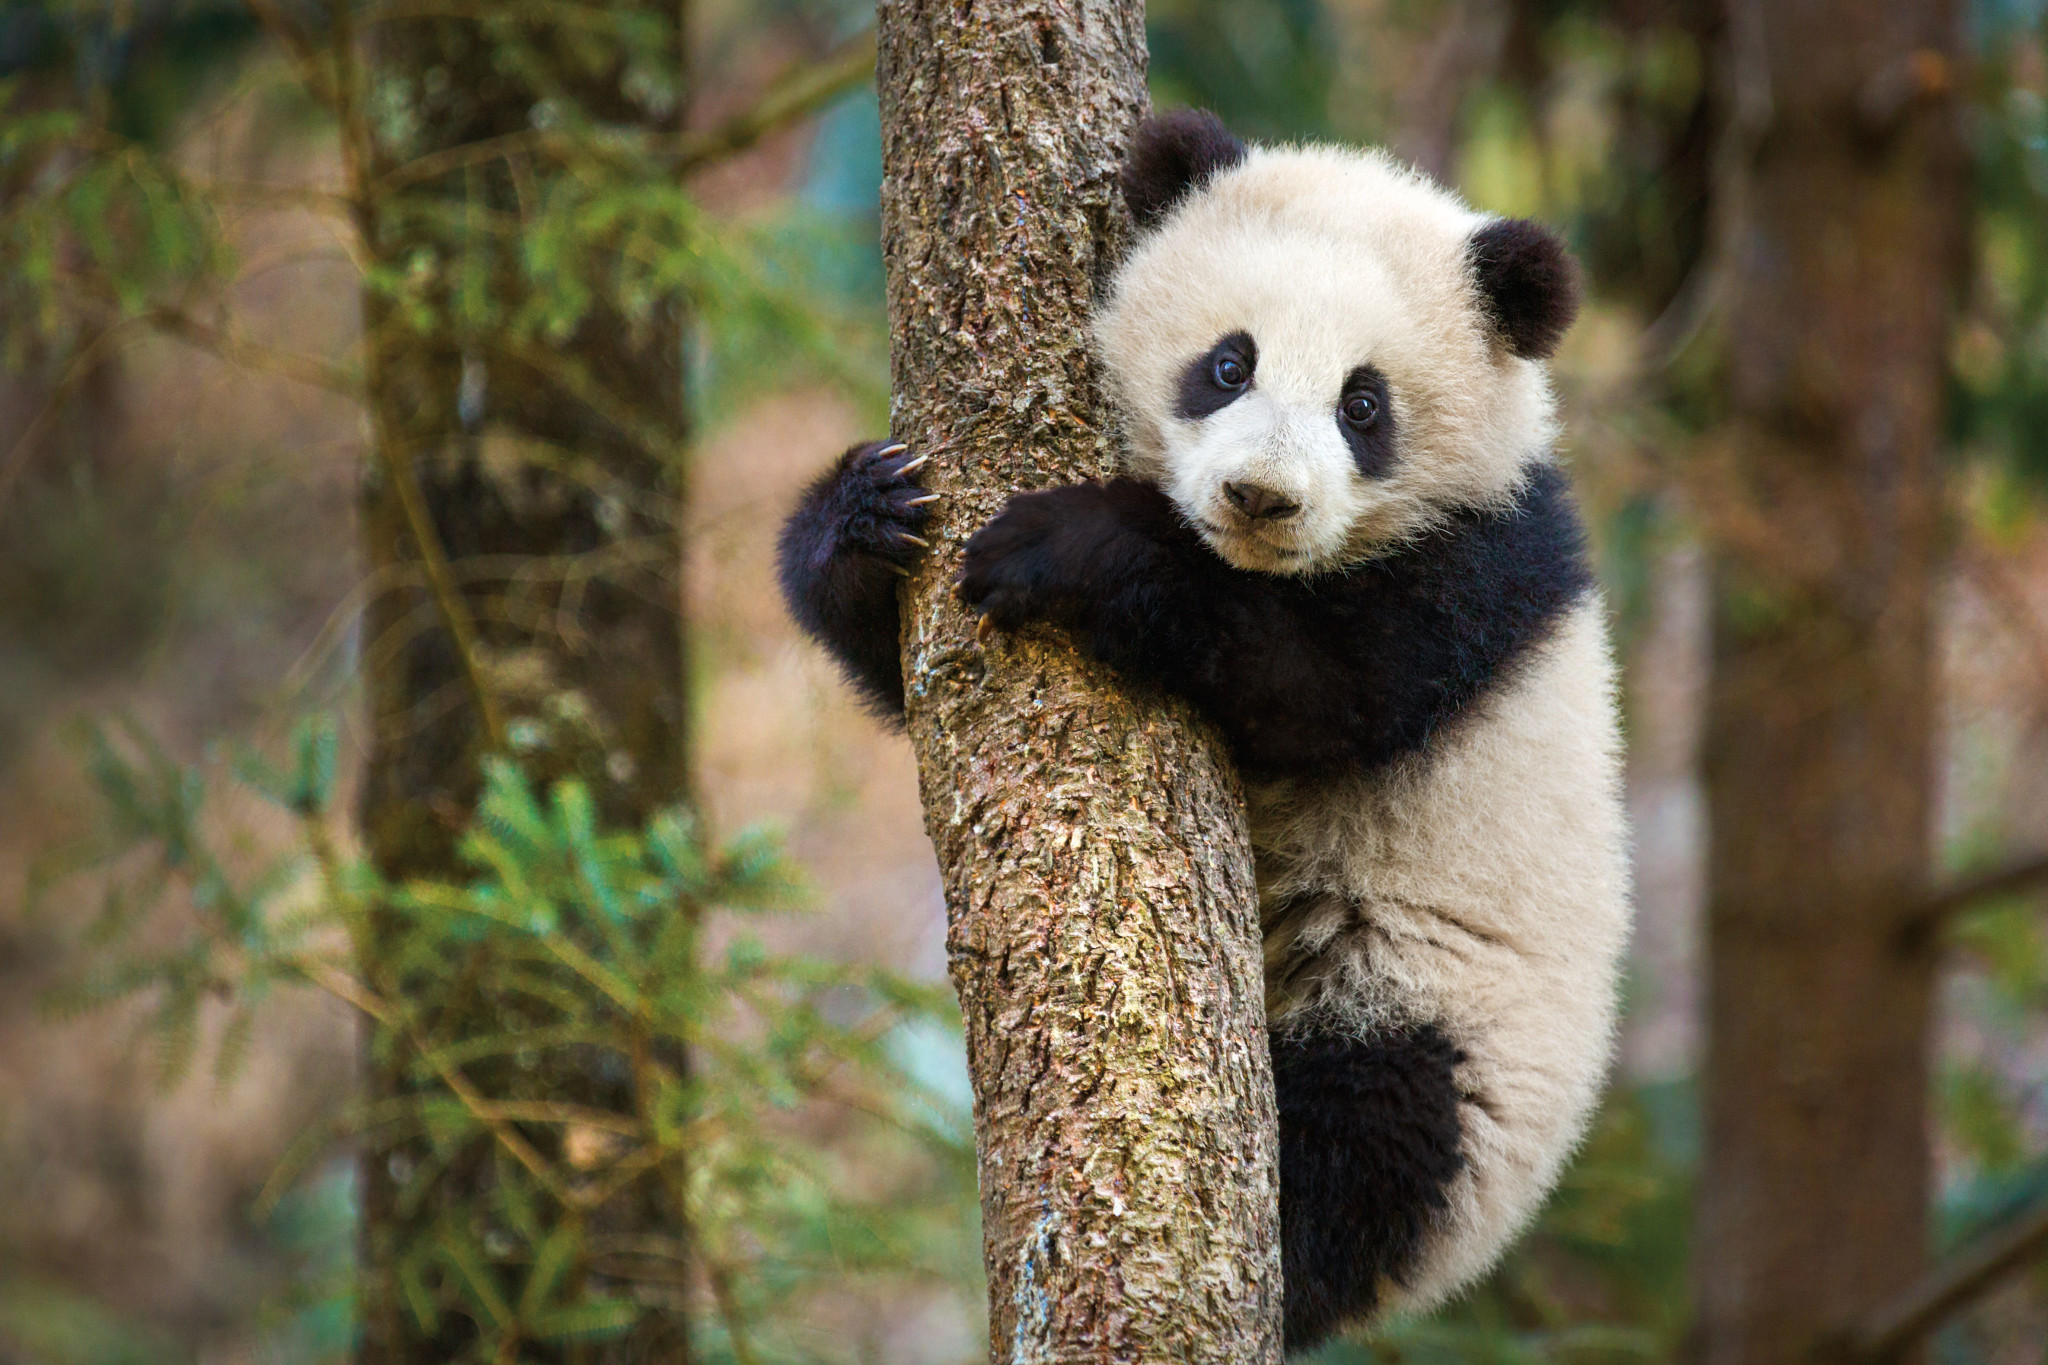 DisneyNature’s Born in China Opening Weekend Will Benefit WWF